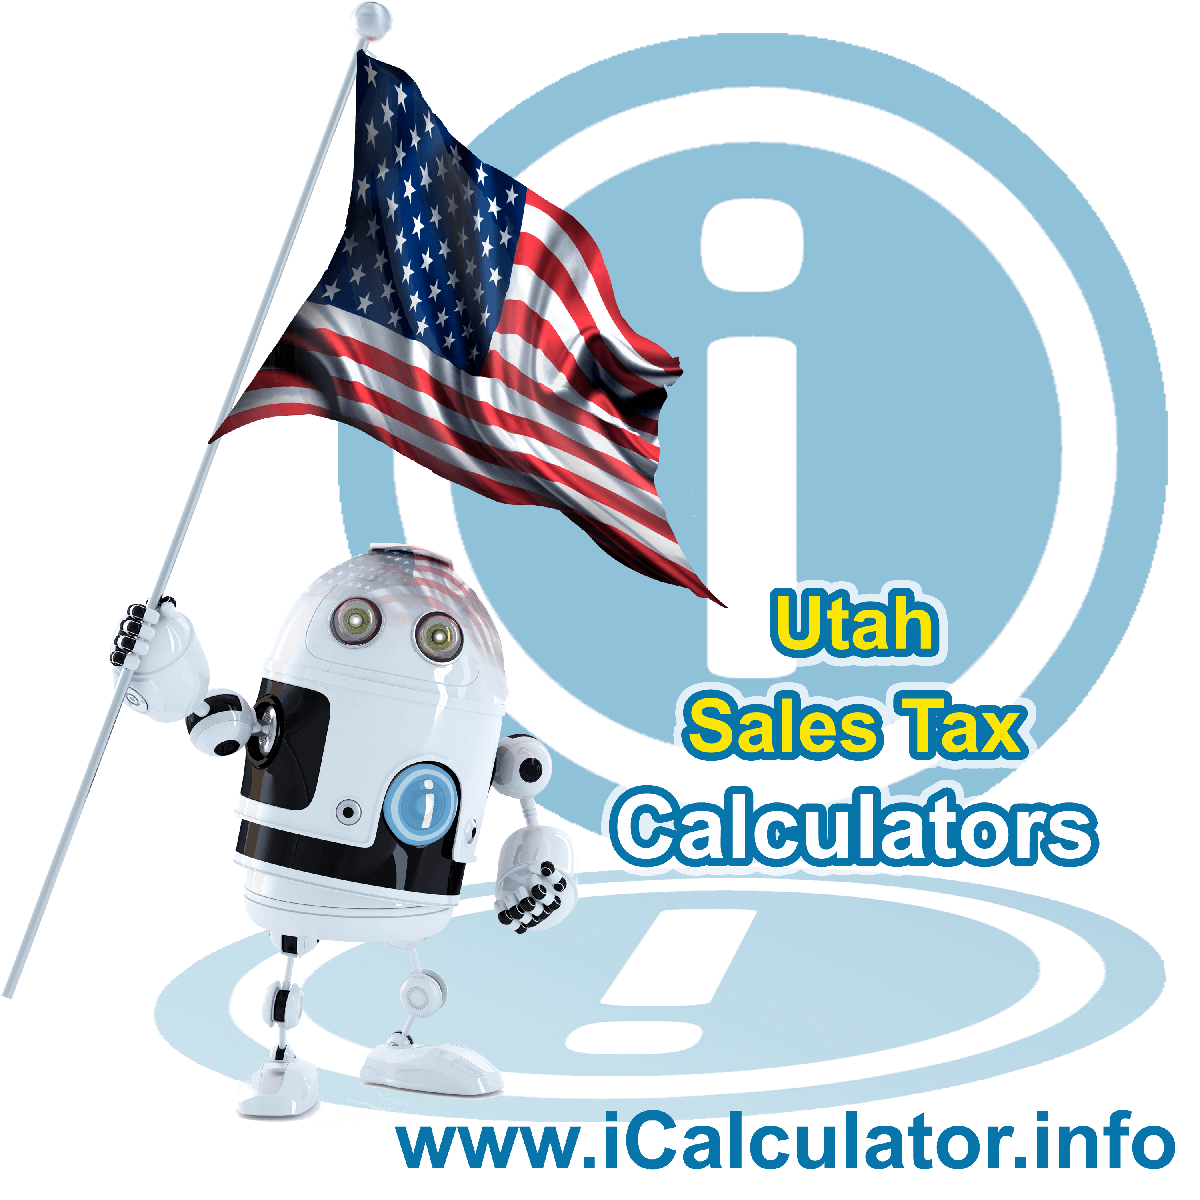 Bicknell Sales Rates: This image illustrates a calculator robot calculating Bicknell sales tax manually using the Bicknell Sales Tax Formula. You can use this information to calculate Bicknell Sales Tax manually or use the Bicknell Sales Tax Calculator to calculate sales tax online.